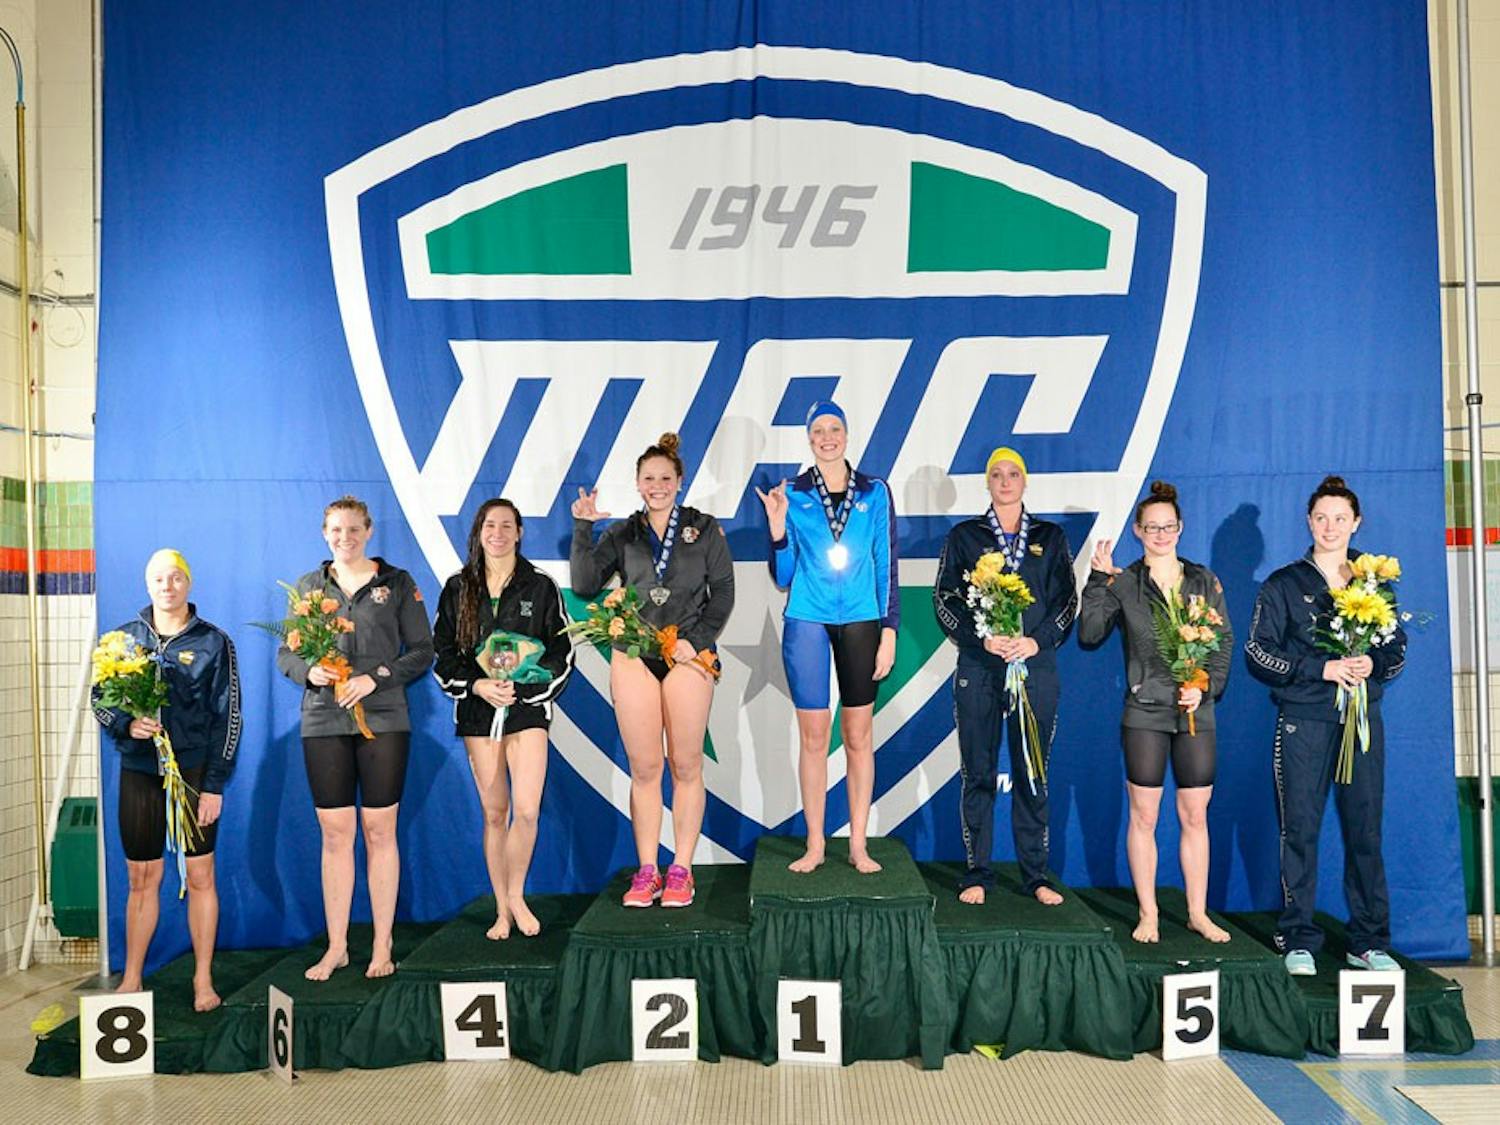 During the women's MAC Swimming and Diving Championship, held in Ypsilanti, Michigan Feb. 25-28, the Bulls finished with nine individual first-place finishes and two team relay wins in 20 events and finished fourth in the competition with 477 points. Jessica Powers (middle) claimed gold in the 500-freestyle, finishing ahead of (from left to right) Akron’s Kara Kaulius, Miami Ohio’s Stephan Pearce, Eastern Michigan’s Carly Jackson, Akron’s Ash Drazkowski, sophomore Paula Stoddard, Bowling Green’s Tara Capouch and Toledo’s Lauren Comer.